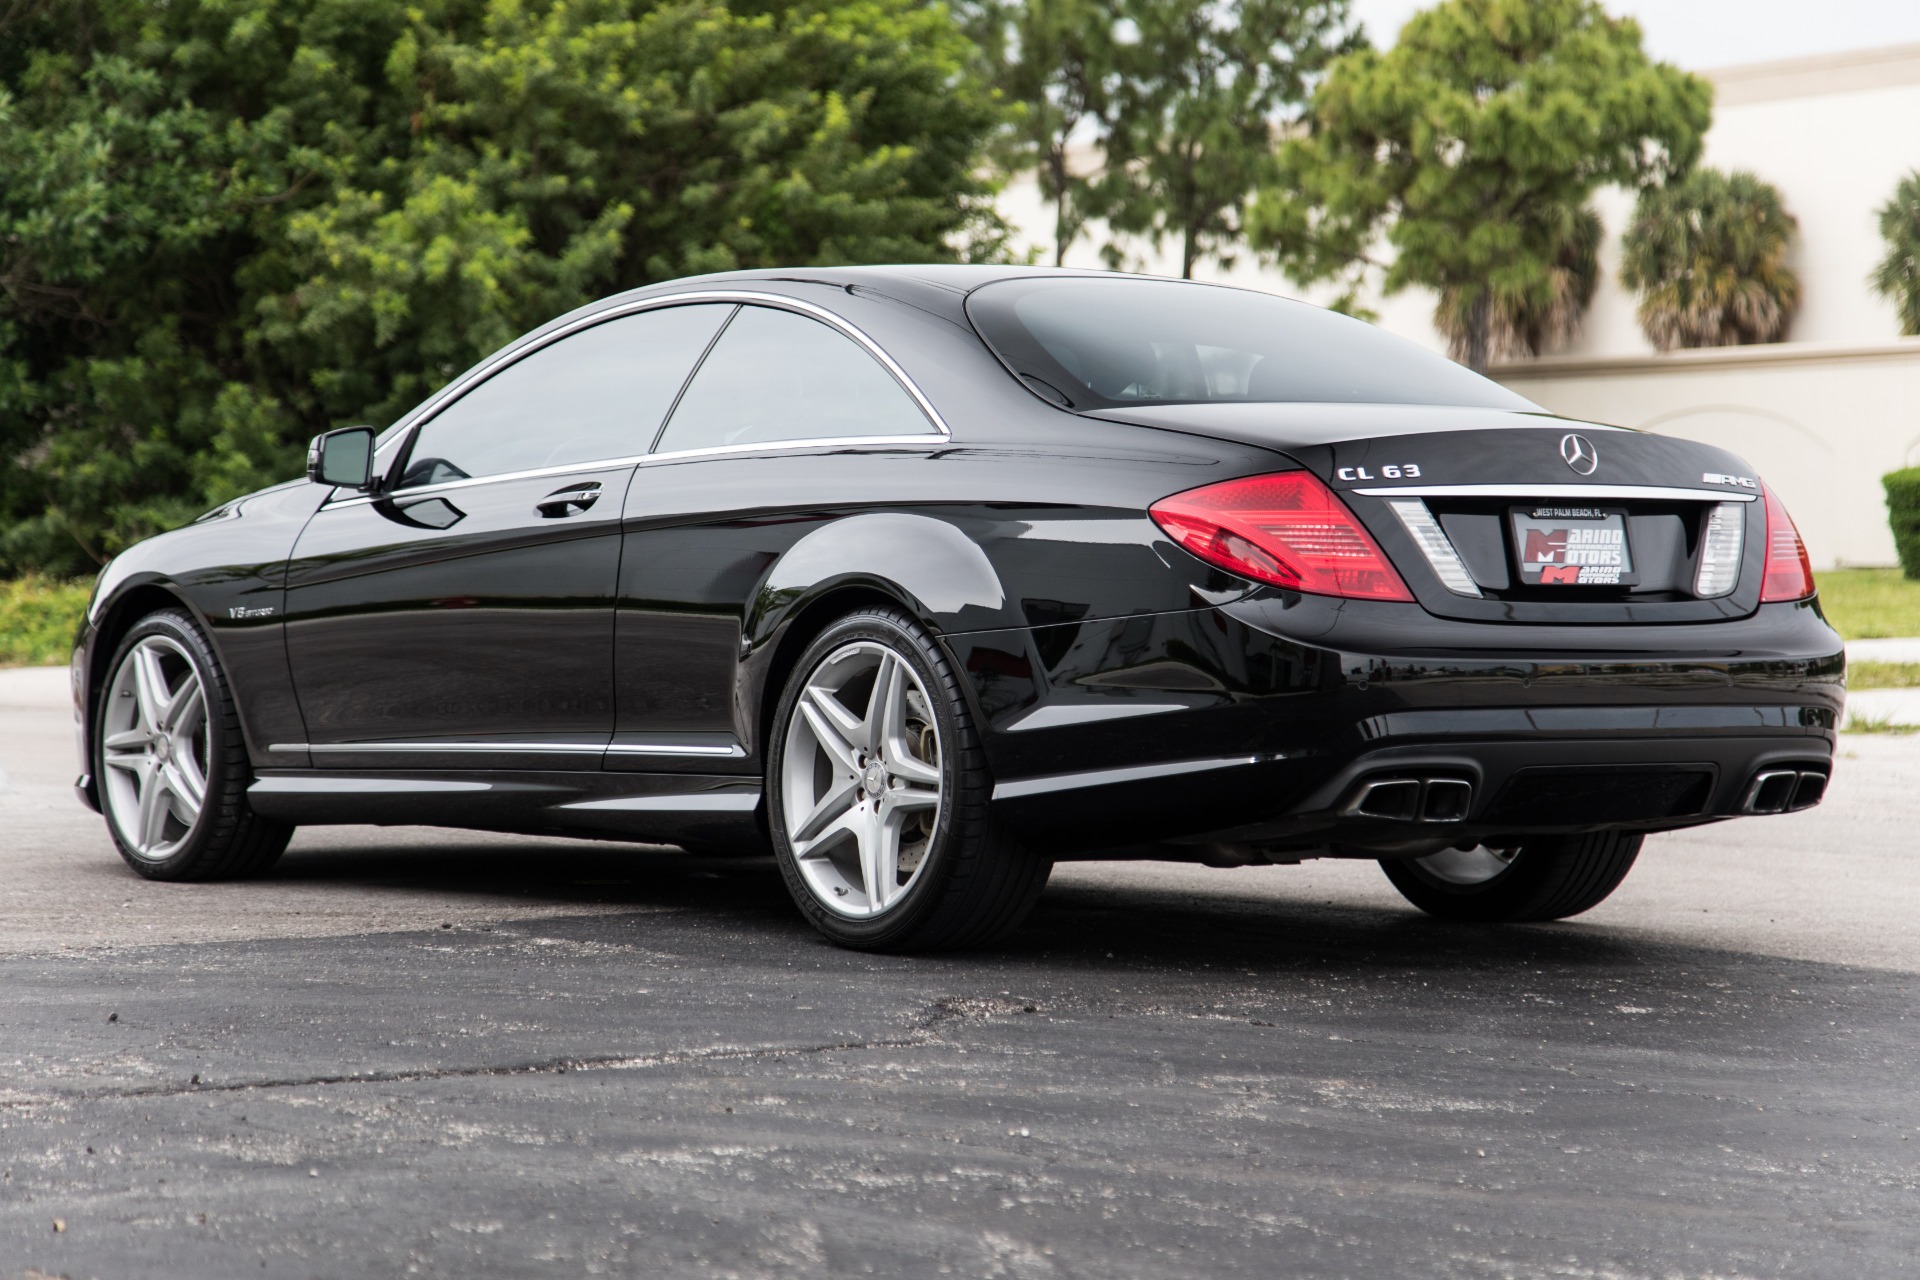 Used 2012 Mercedes Benz CL Class CL 63 AMG For Sale 44 900 Marino 